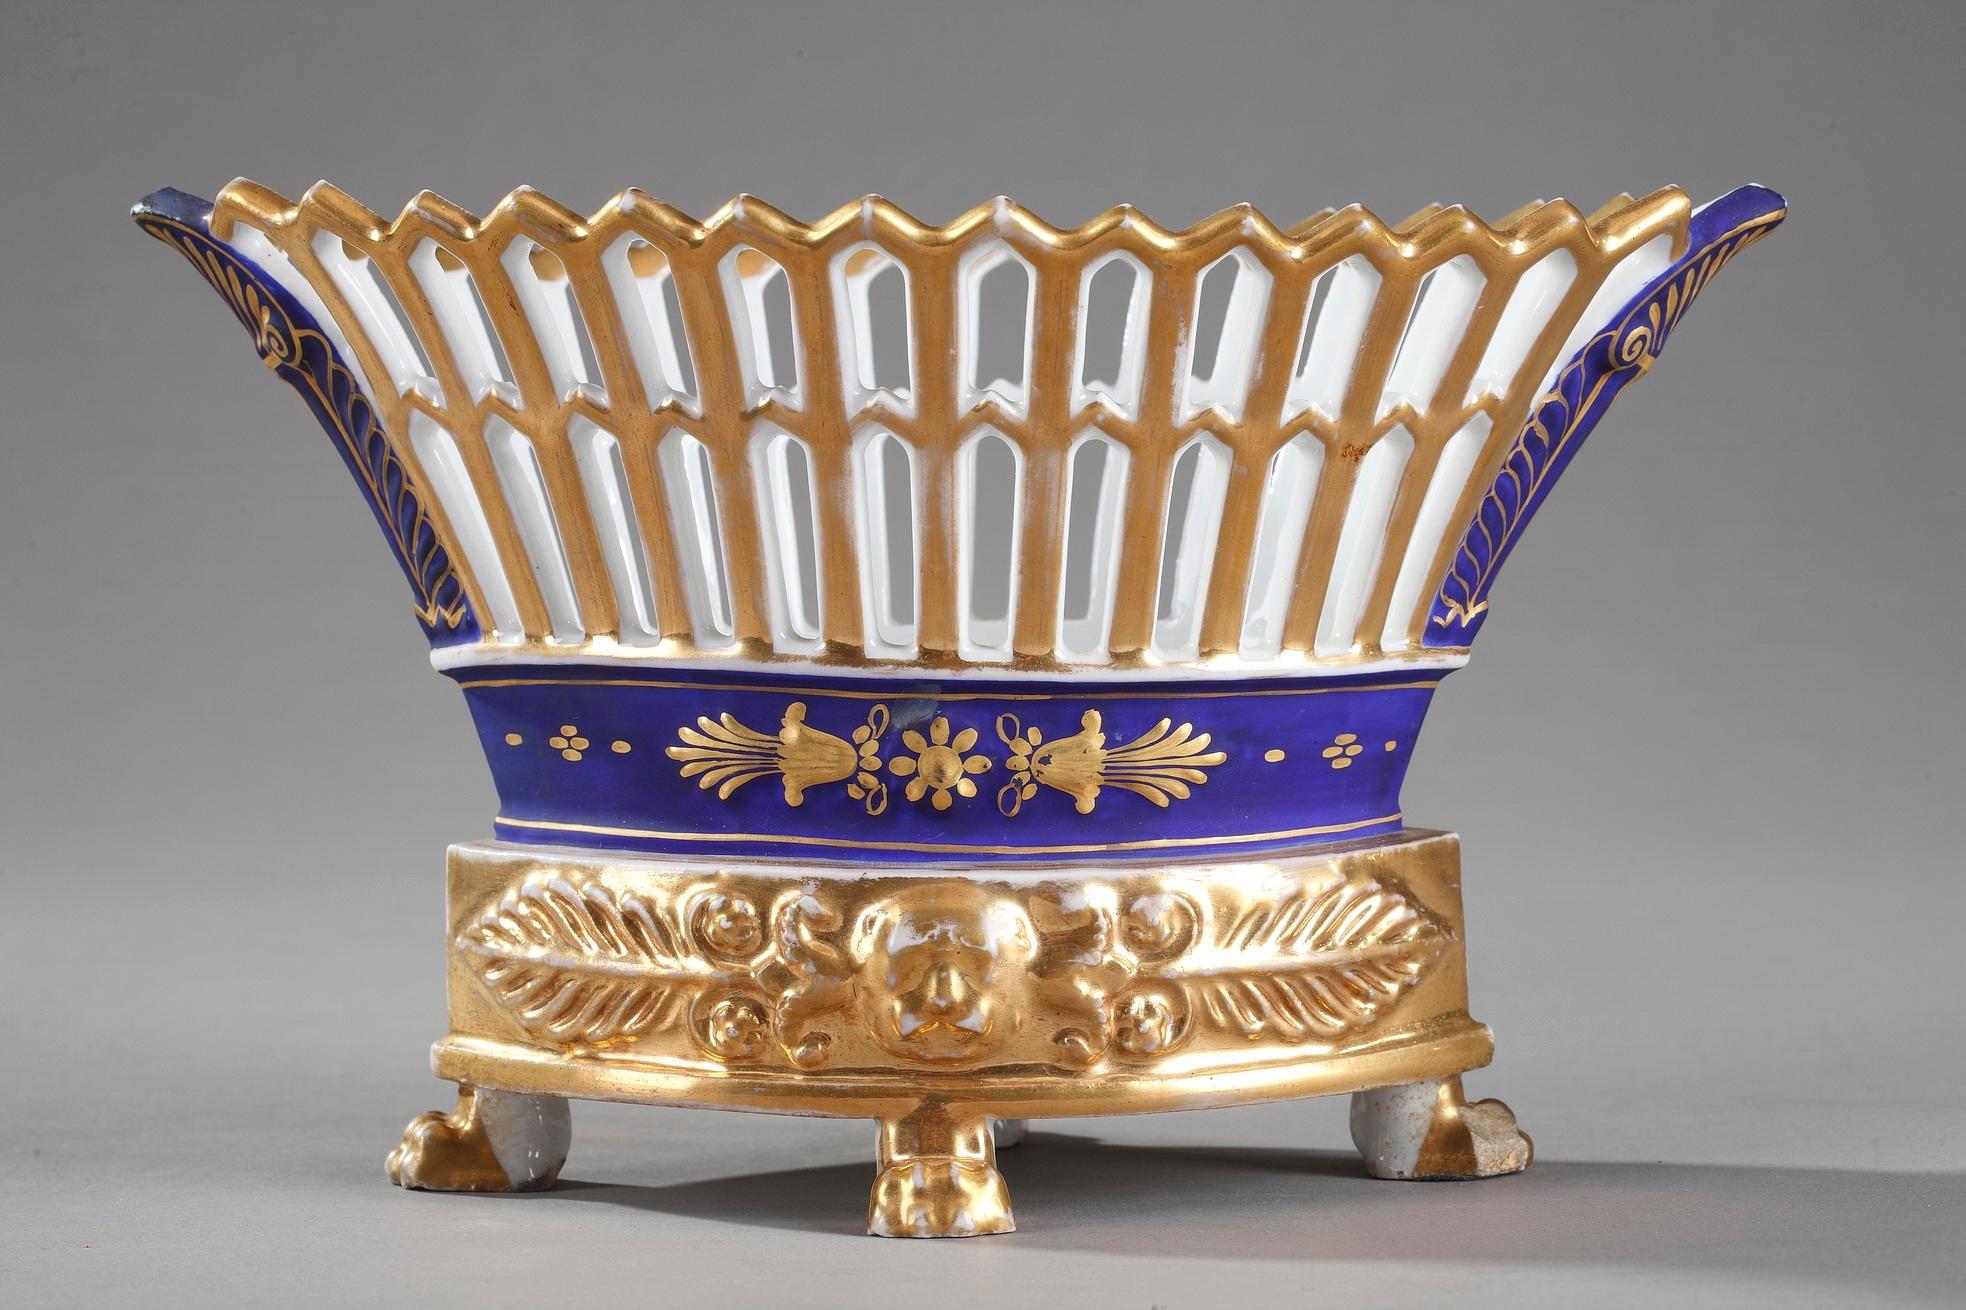 Small French basket in white and blue porcelain, highlighted with delicate gilt-accented floral motif. Crafted in the early 19th century, this service dish features a radiating latticework flanked by gold colored palmette. It is set upon an oval